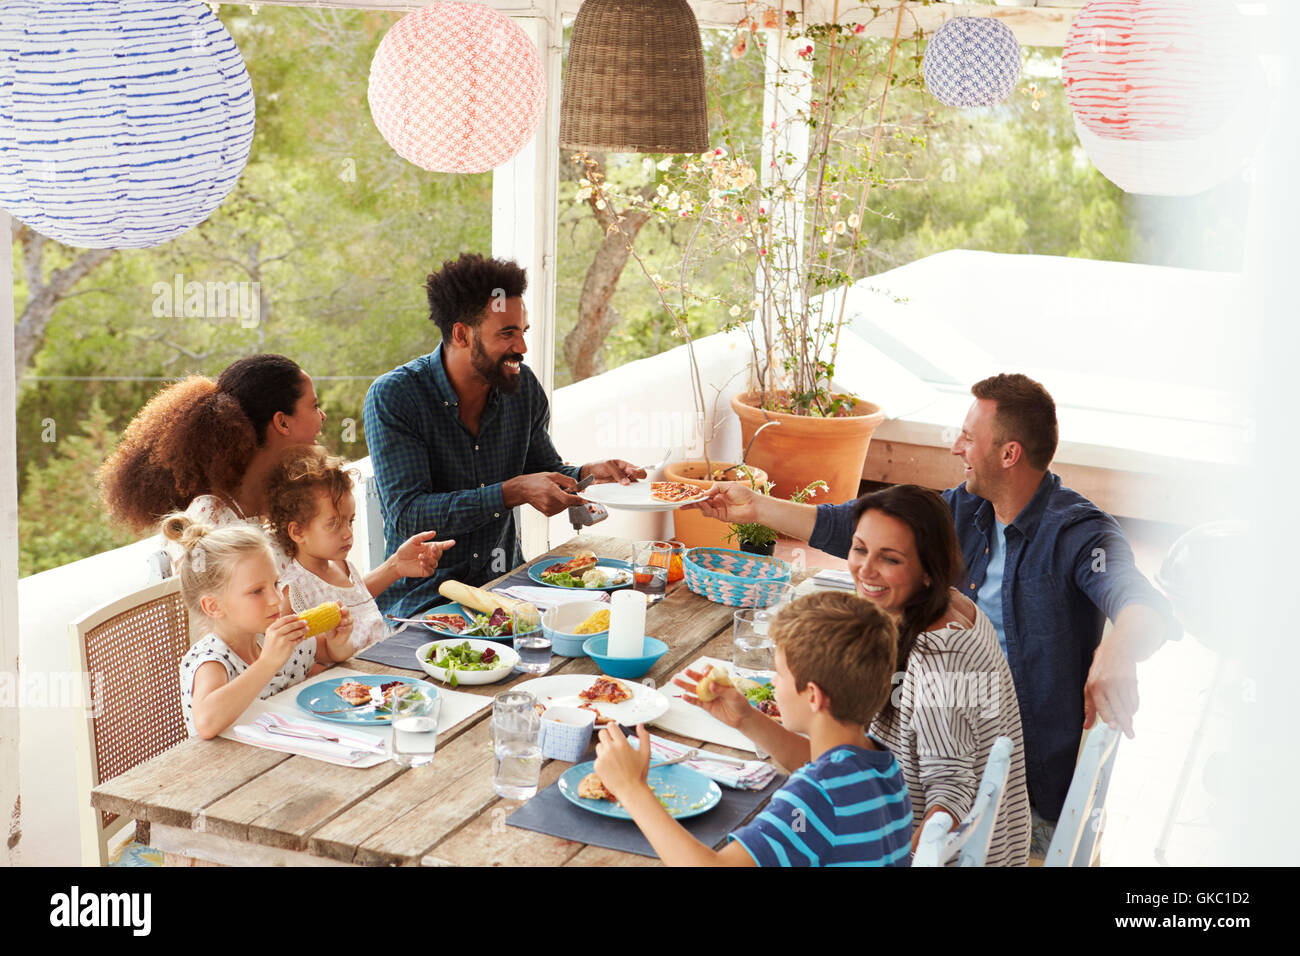 Families Enjoying Outdoor Meal On Terrace Together Stock Photo